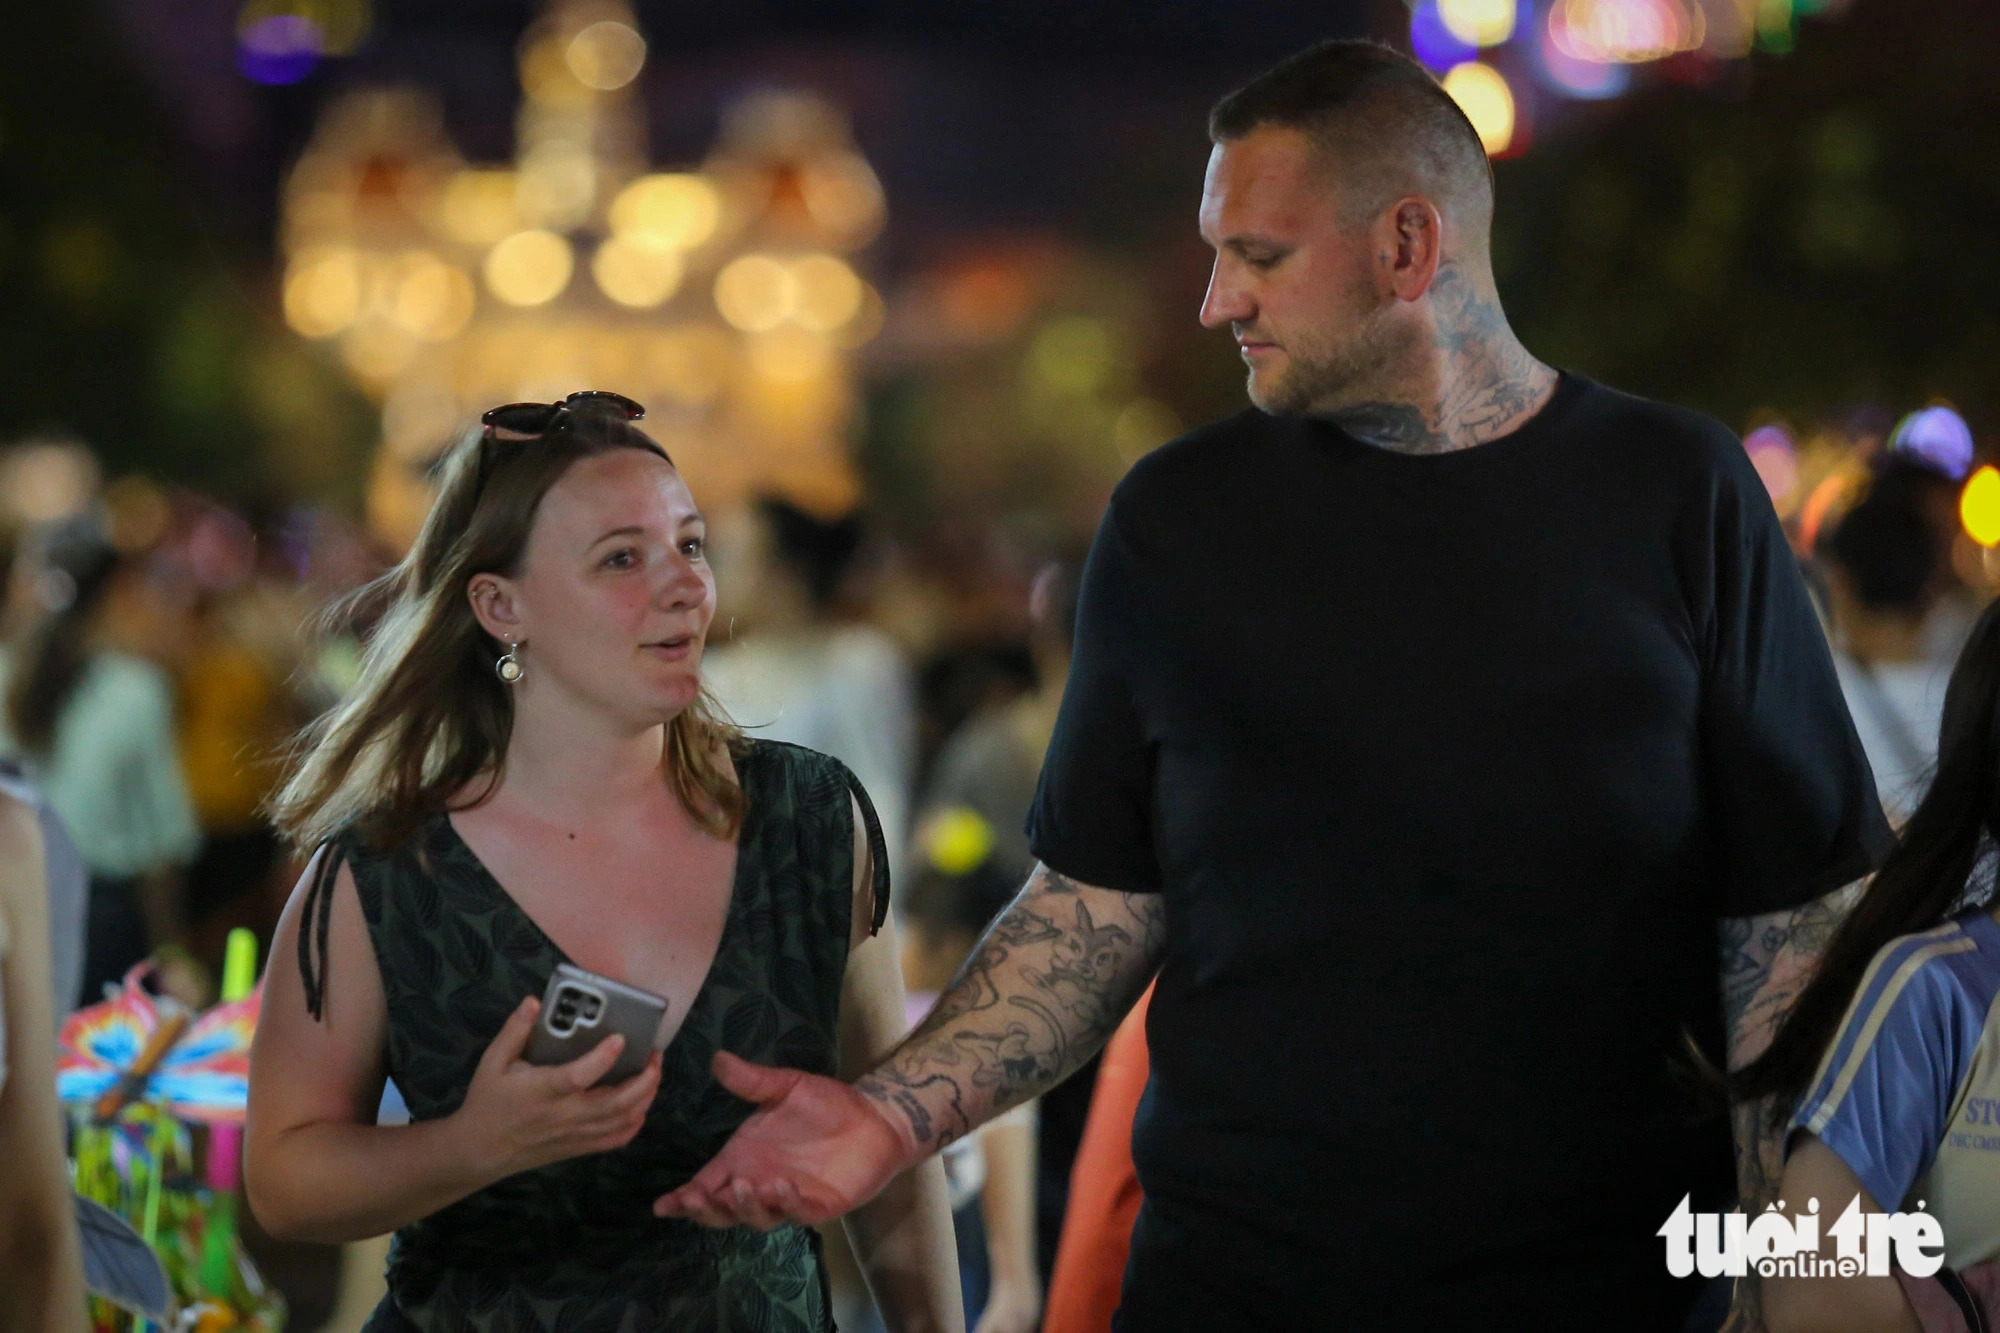 Two Russian visitors are seen strolling along Nguyen Hue pedestrian street in District 1, Ho Chi Minh City where crowds of people gather to watch a firework show. Photo: Phuong Quyen / Tuoi Tre